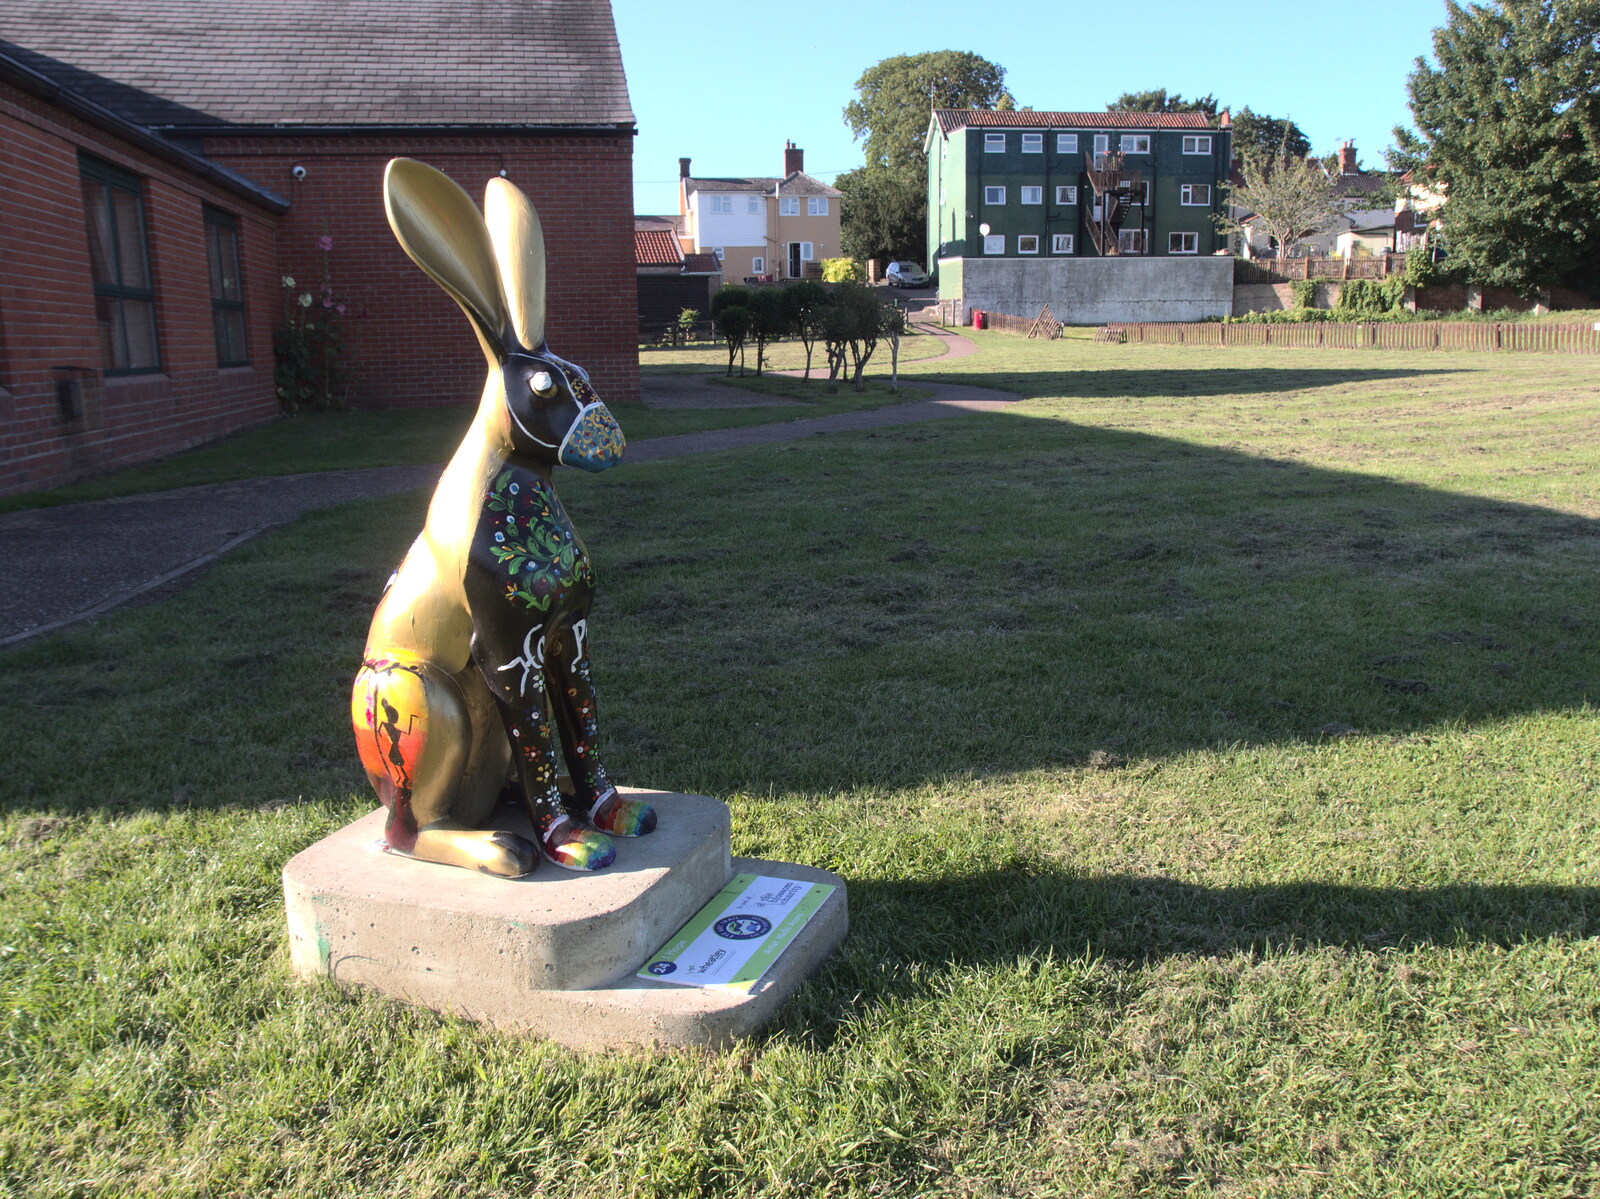 A golden hare outside the Eye community centre from Hares, Tortoises and Station 119, Eye, Suffolk - 19th July 2021